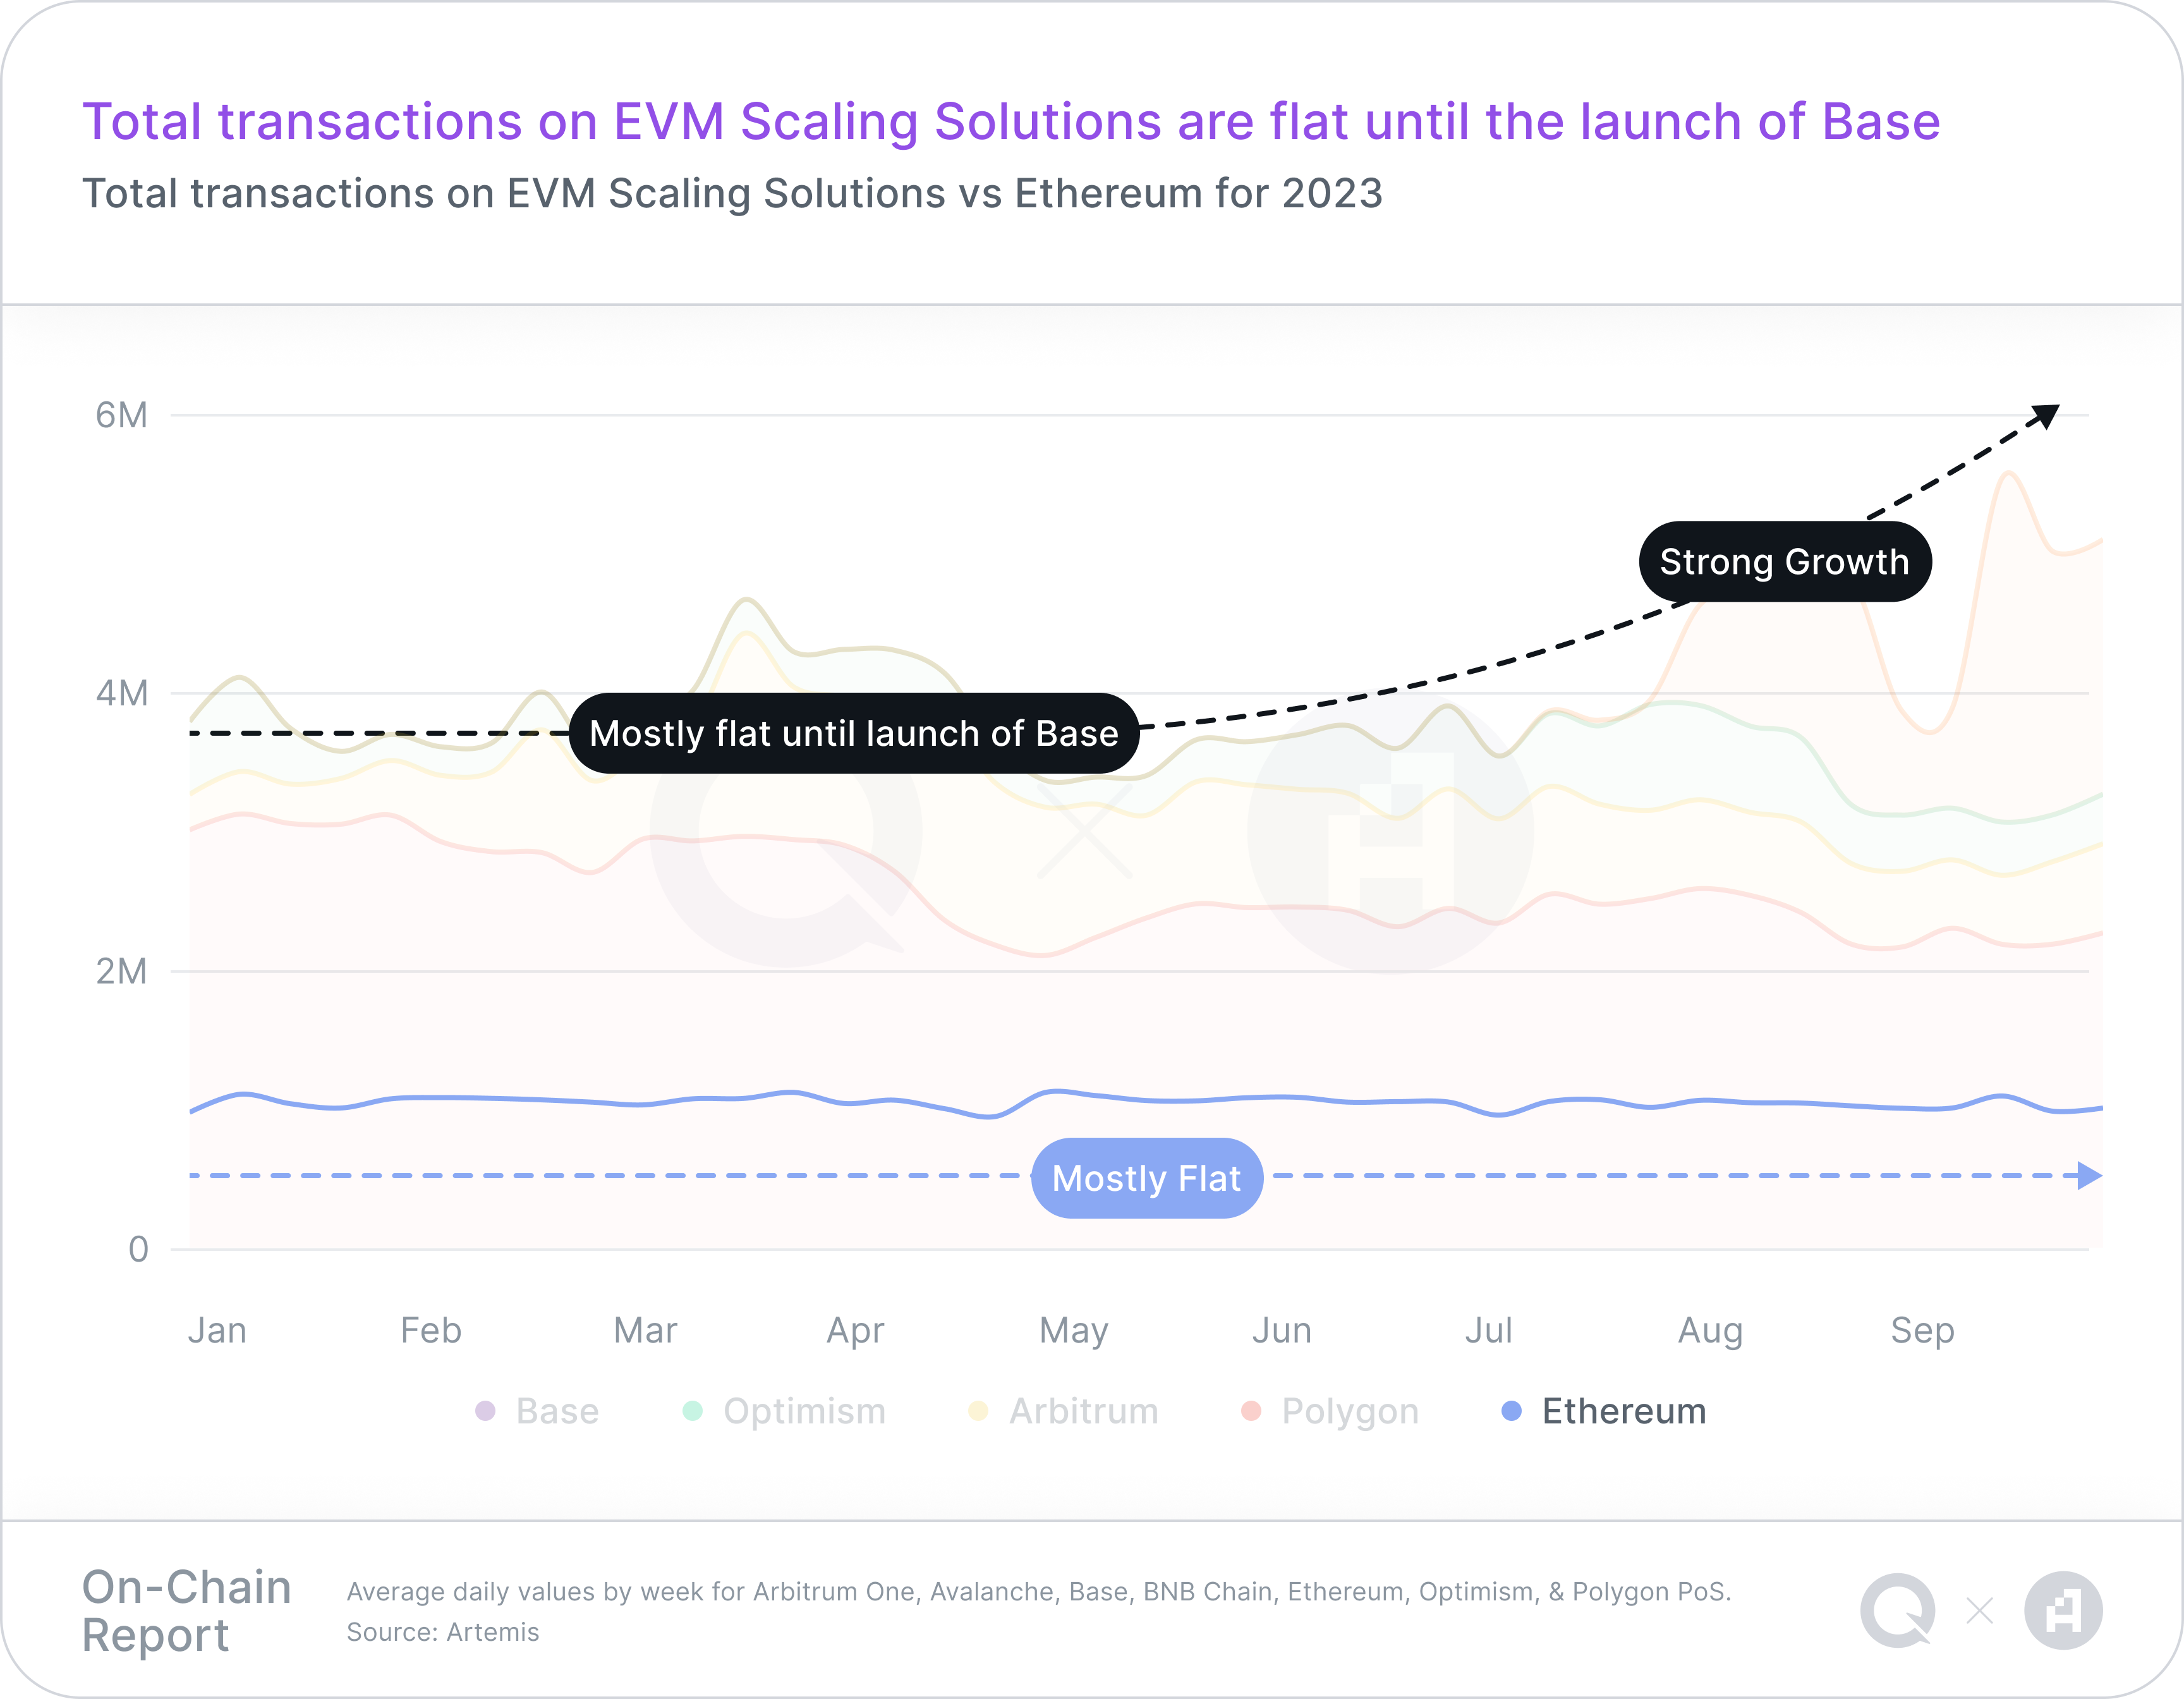 A chart representing Total transactions on EVM Scaling Solutions vs Ethereum for 2023, with a takeaway headline of "Total transactions on EVM Scaling Solutions are flat until the launch of Base"